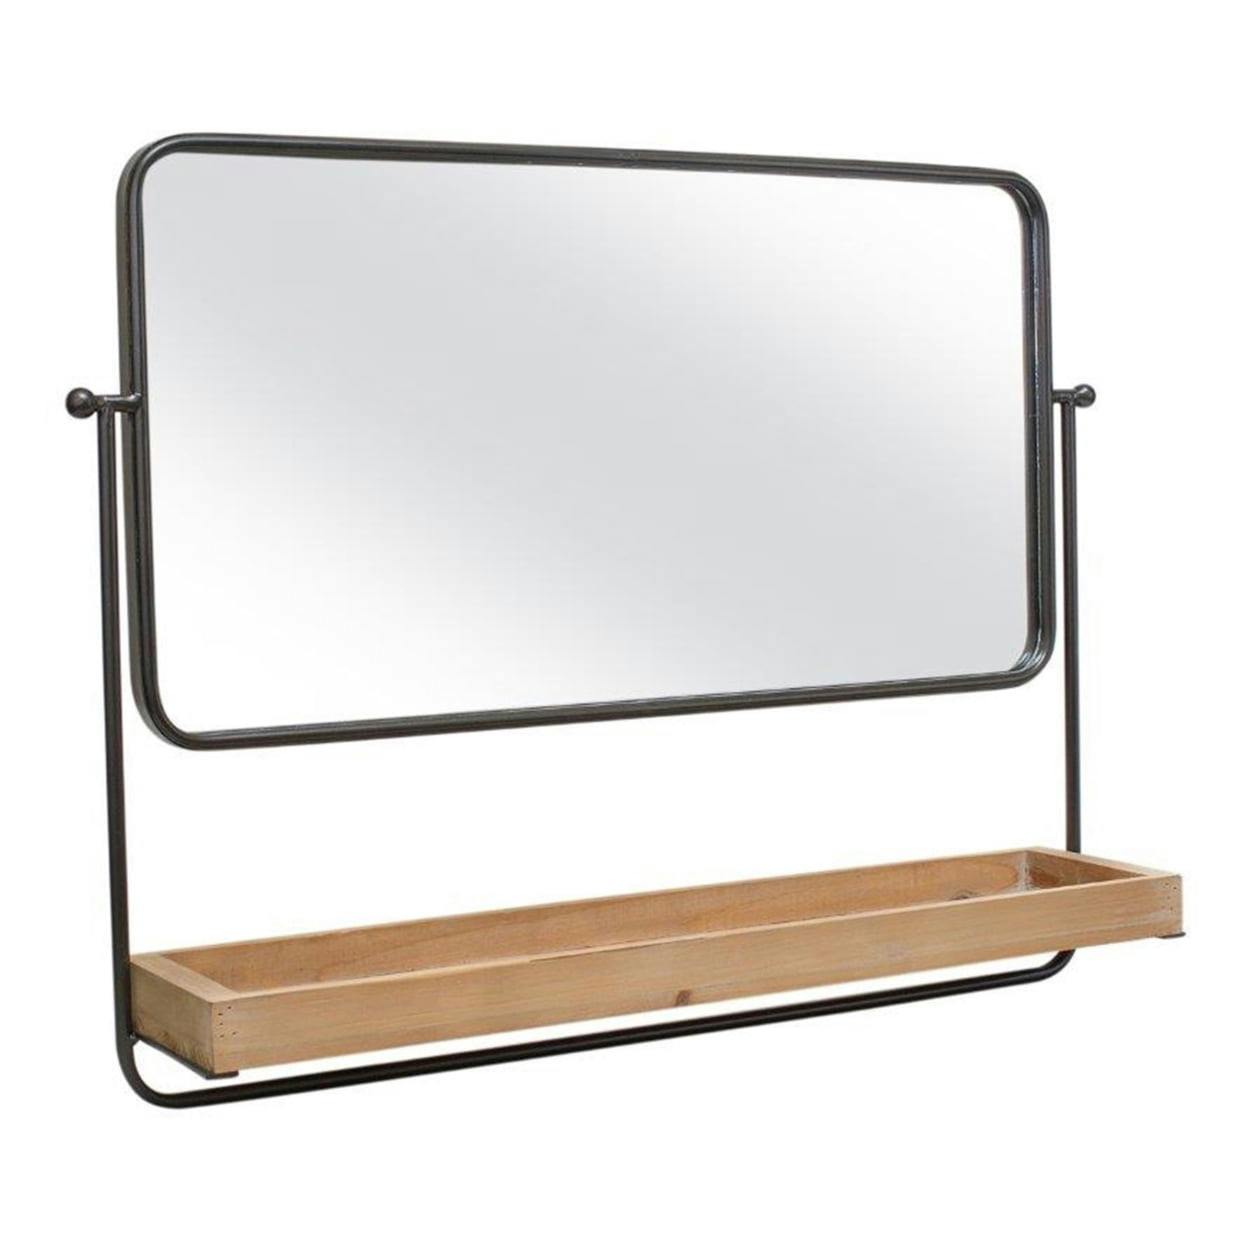 Contemporary Black Metal & Wood Wall Mirror with Shelf, 29"L